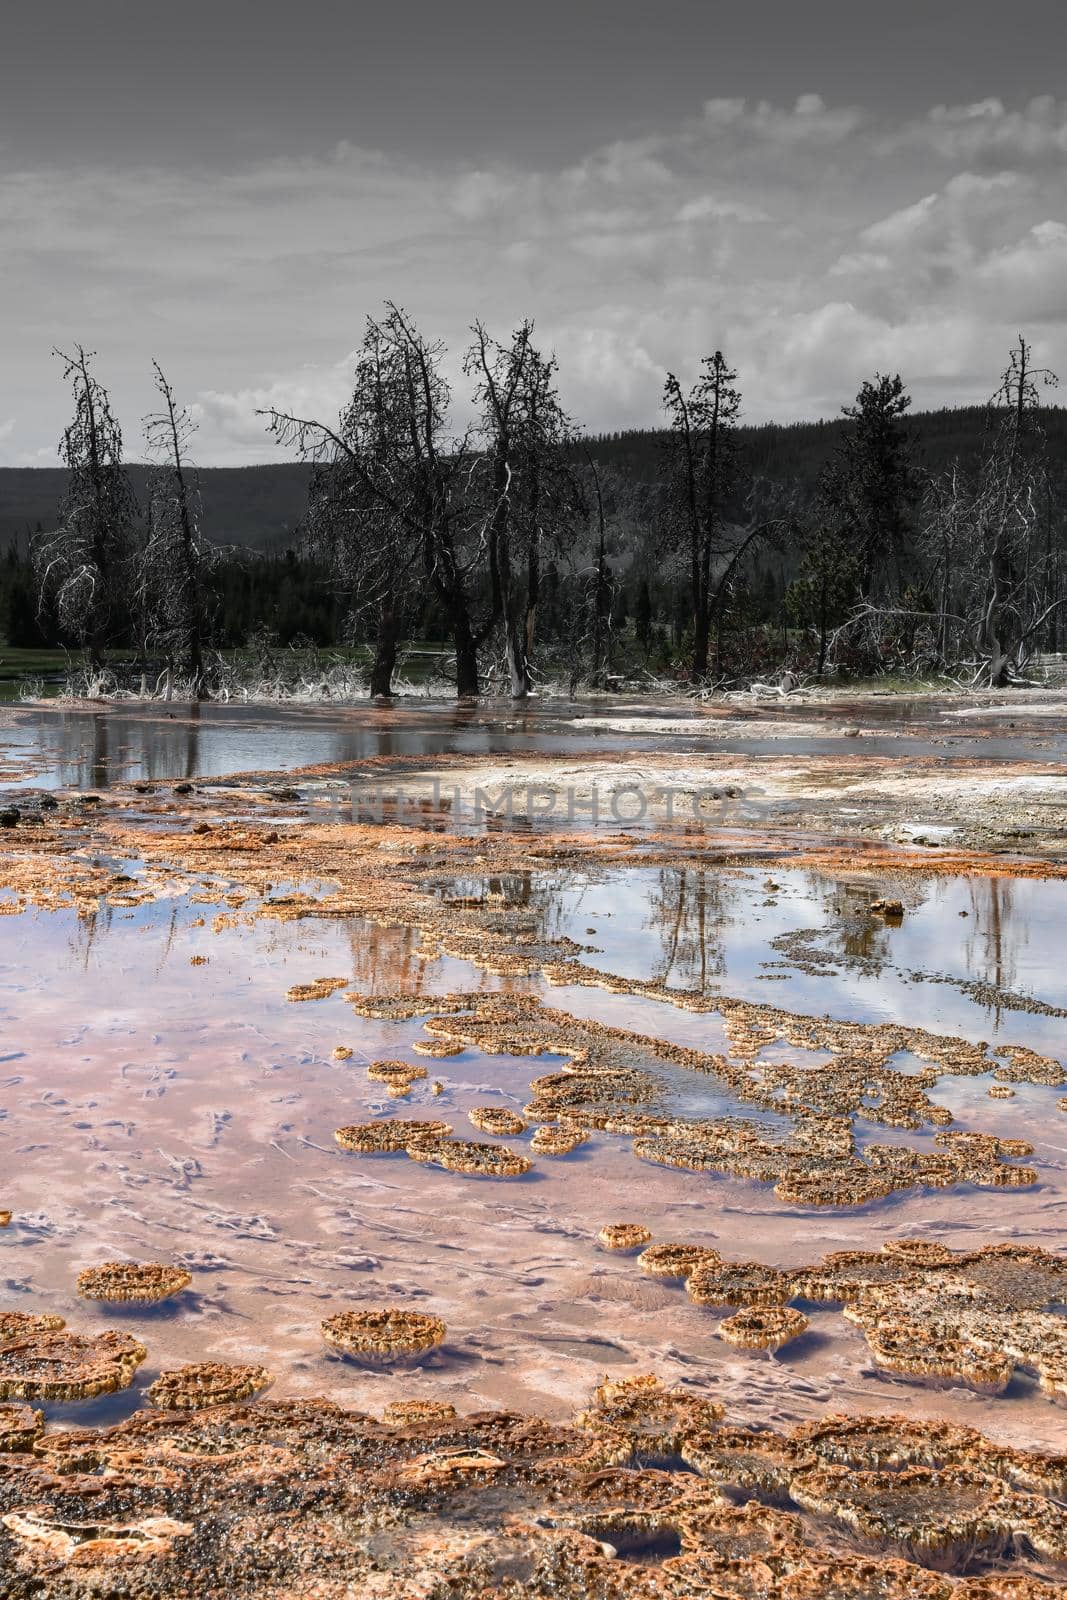 Yelllowstone National Park Bacterial Pool by lisaldw